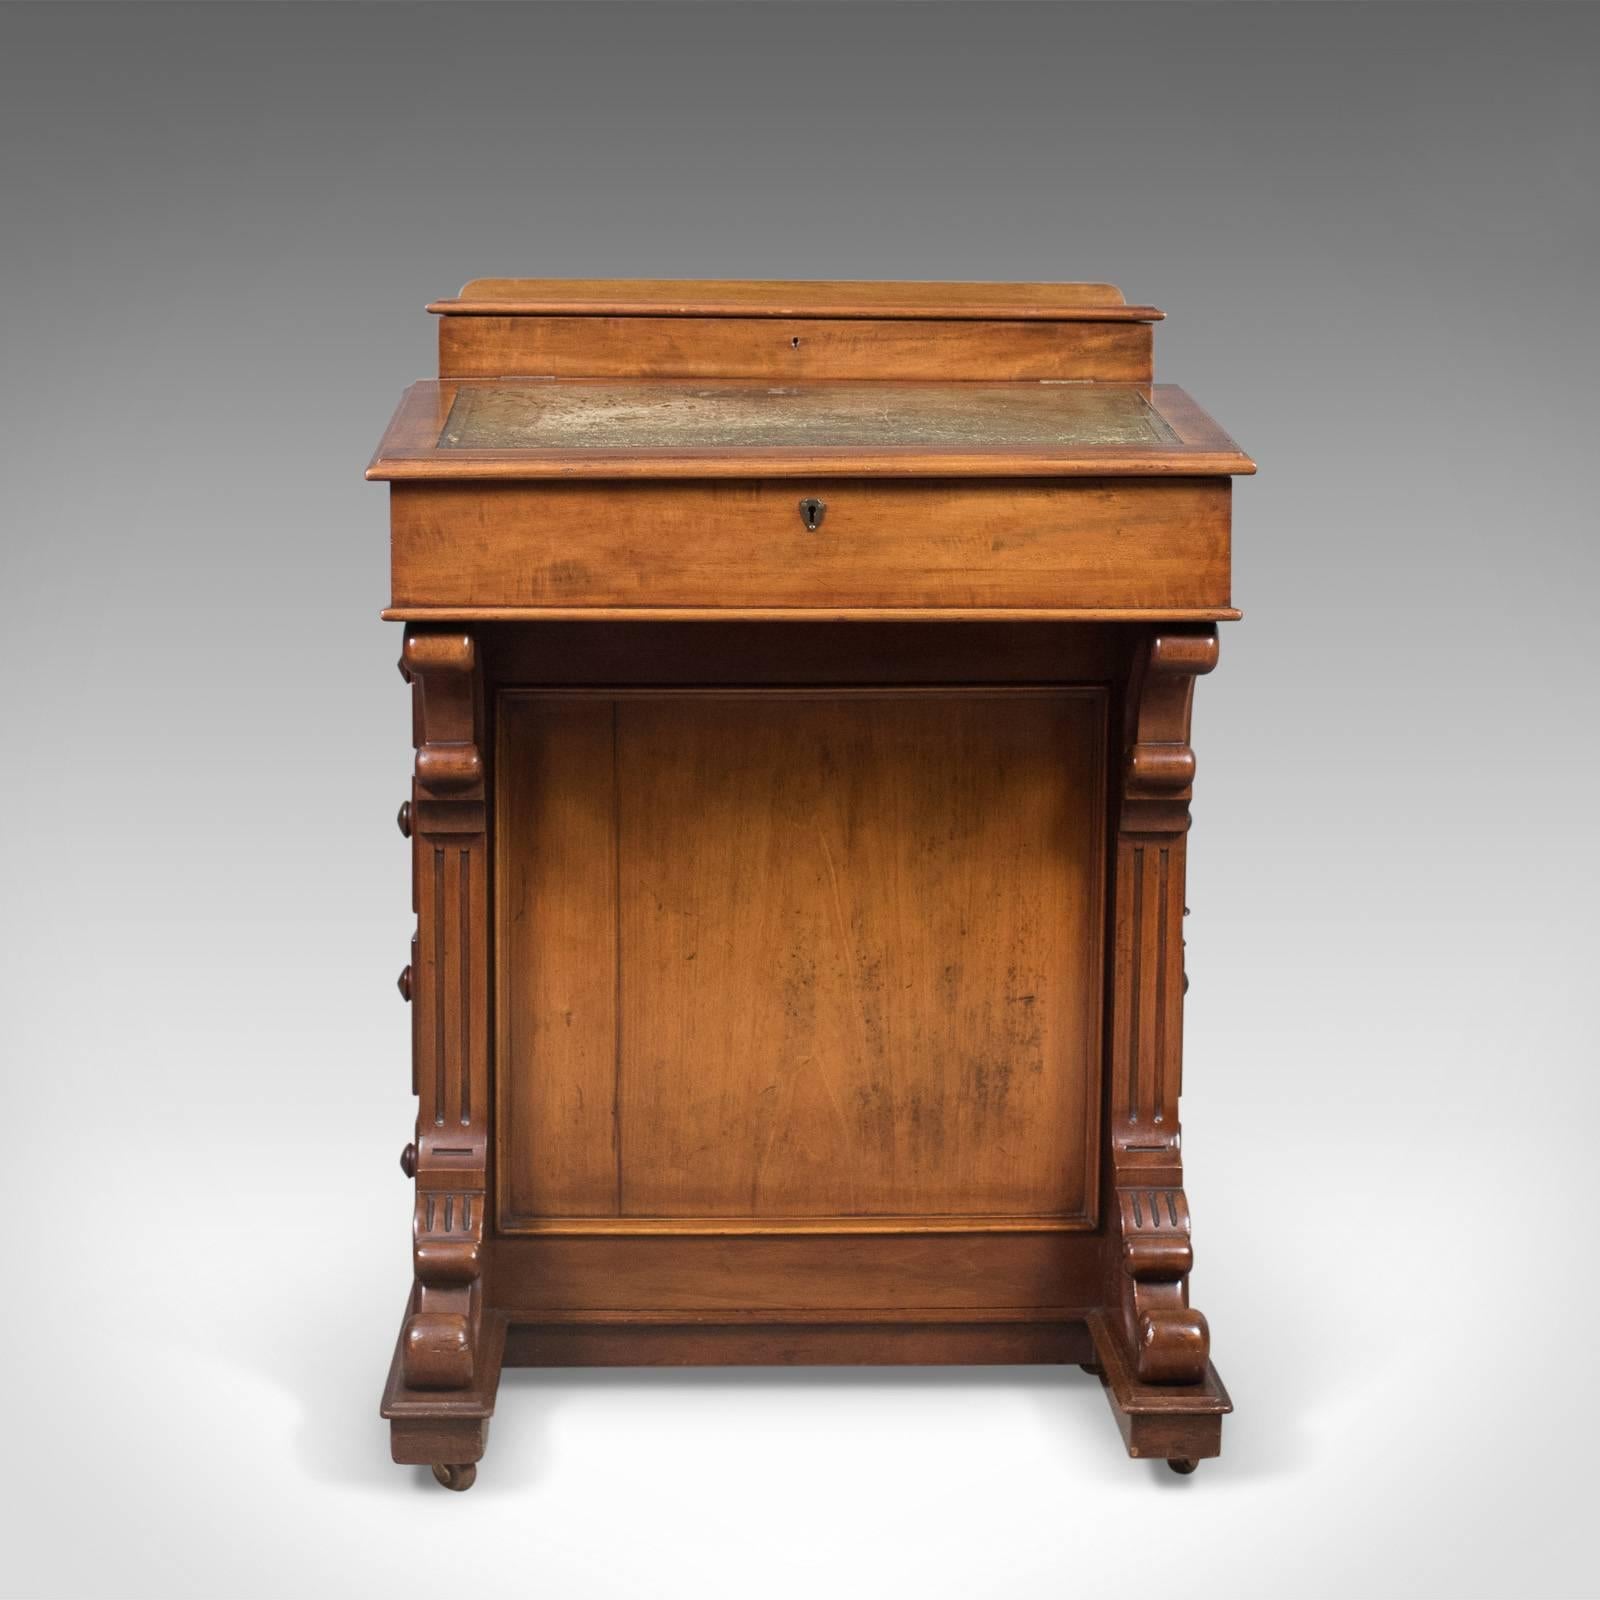 This is an antique Davenport, an English, Victorian writing desk in mahogany dating to circa 1870.

Presented with good colour and a desirable aged patina
Classical brackets and fluting decorating the lower front of the cabinet
Riding upon the